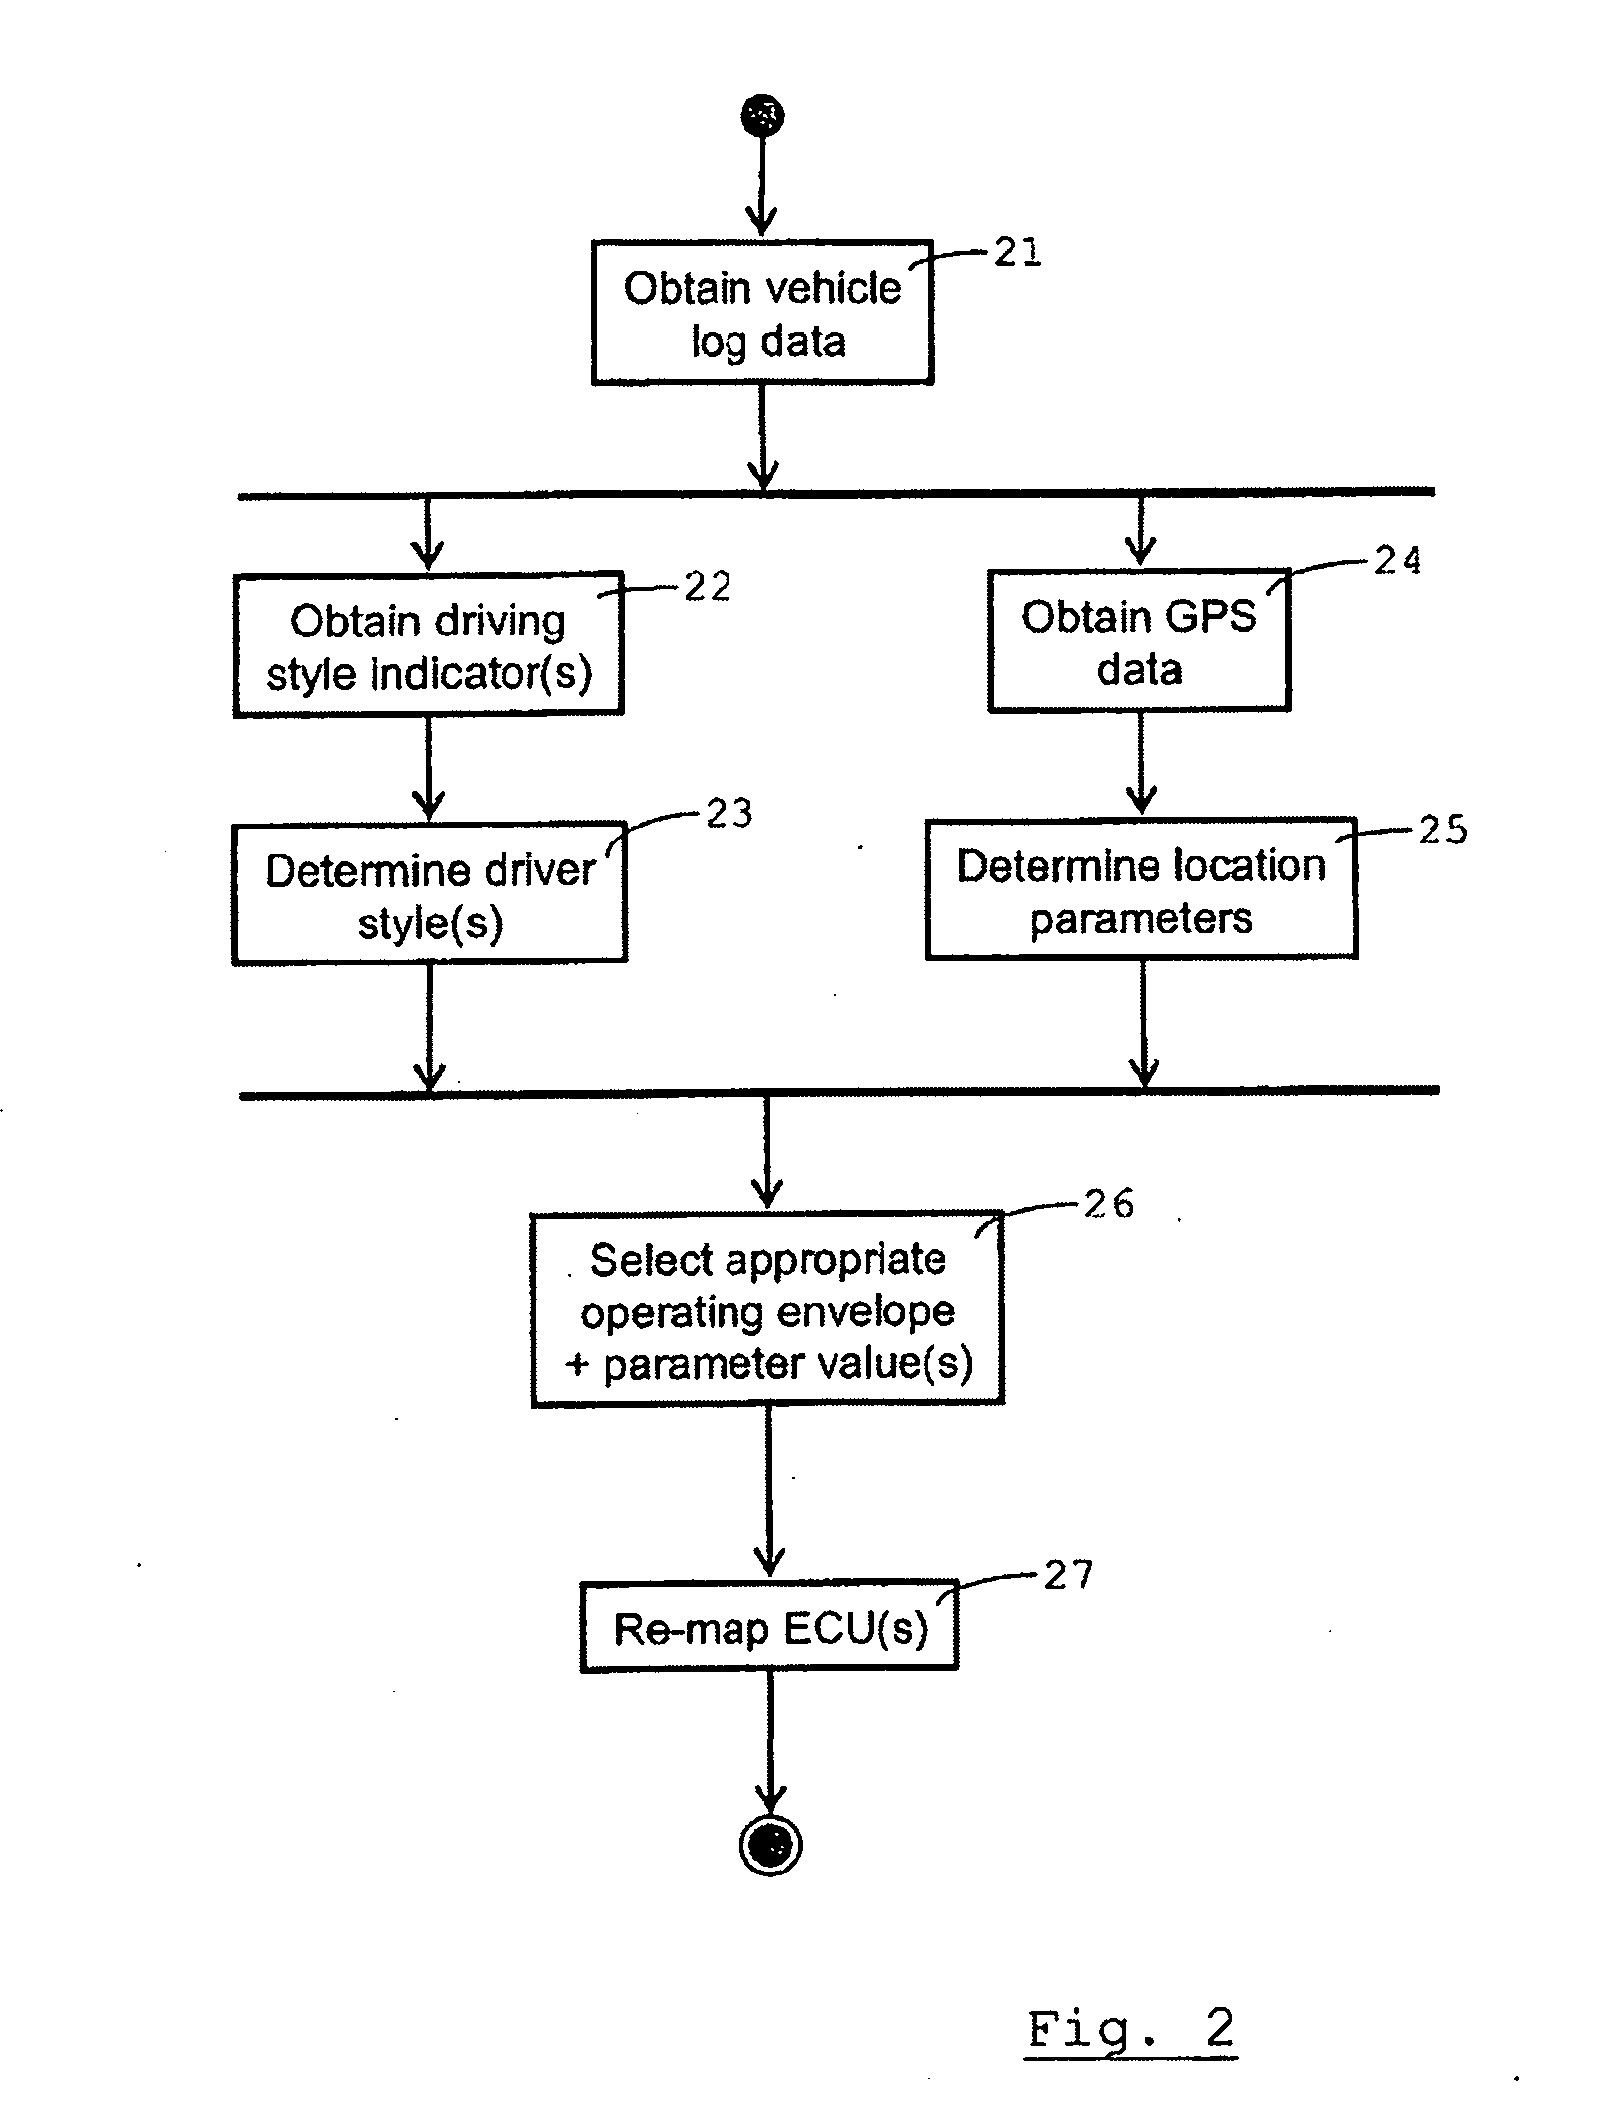 Configuration of an Electronic Control System for Controlling the Operation of at Least One Component of a Vehicle